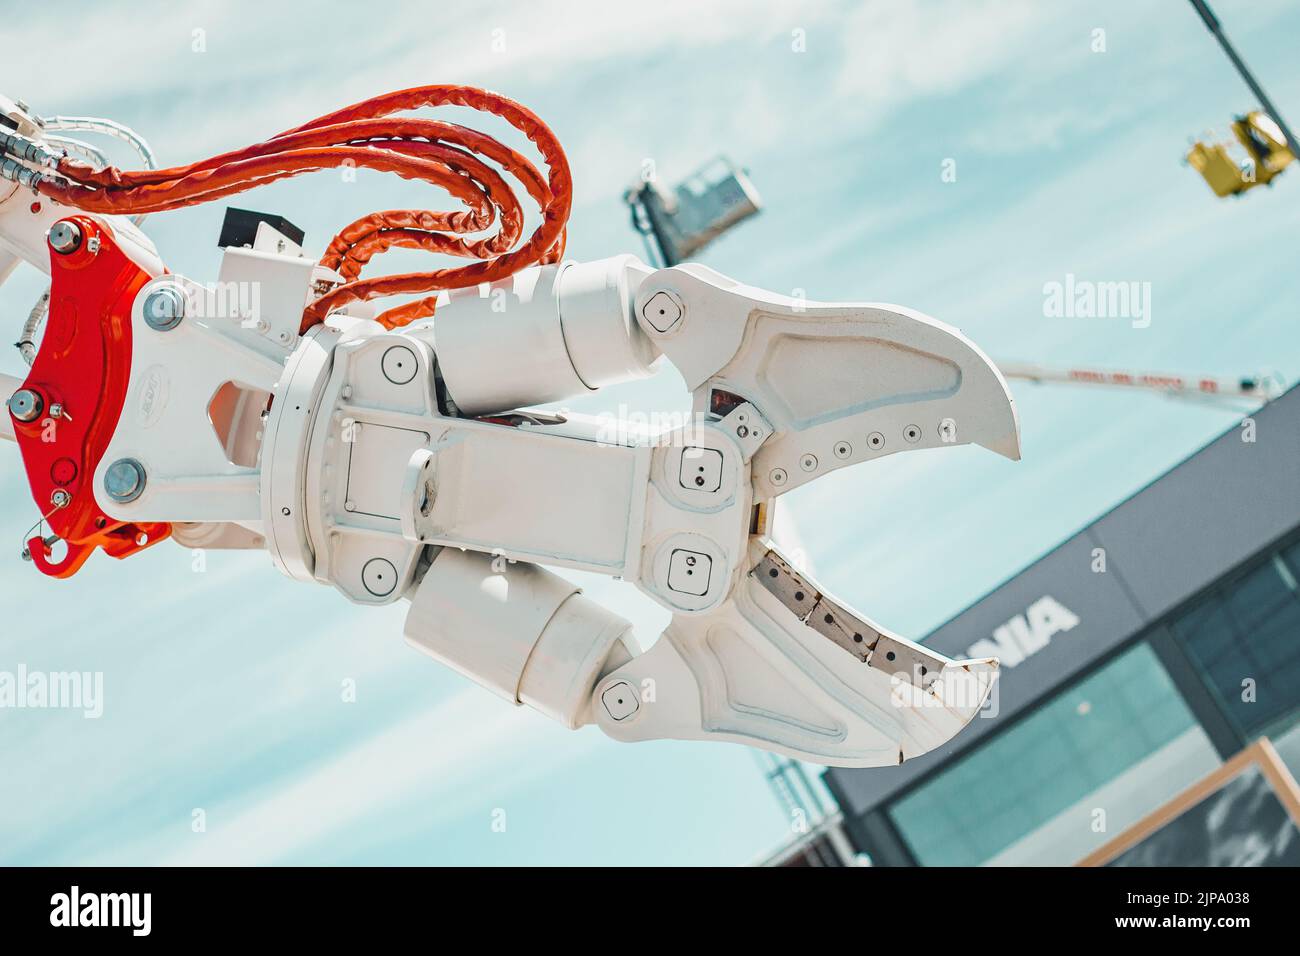 White open robotic arm with orange and red details over a blue sky and a bulding Stock Photo